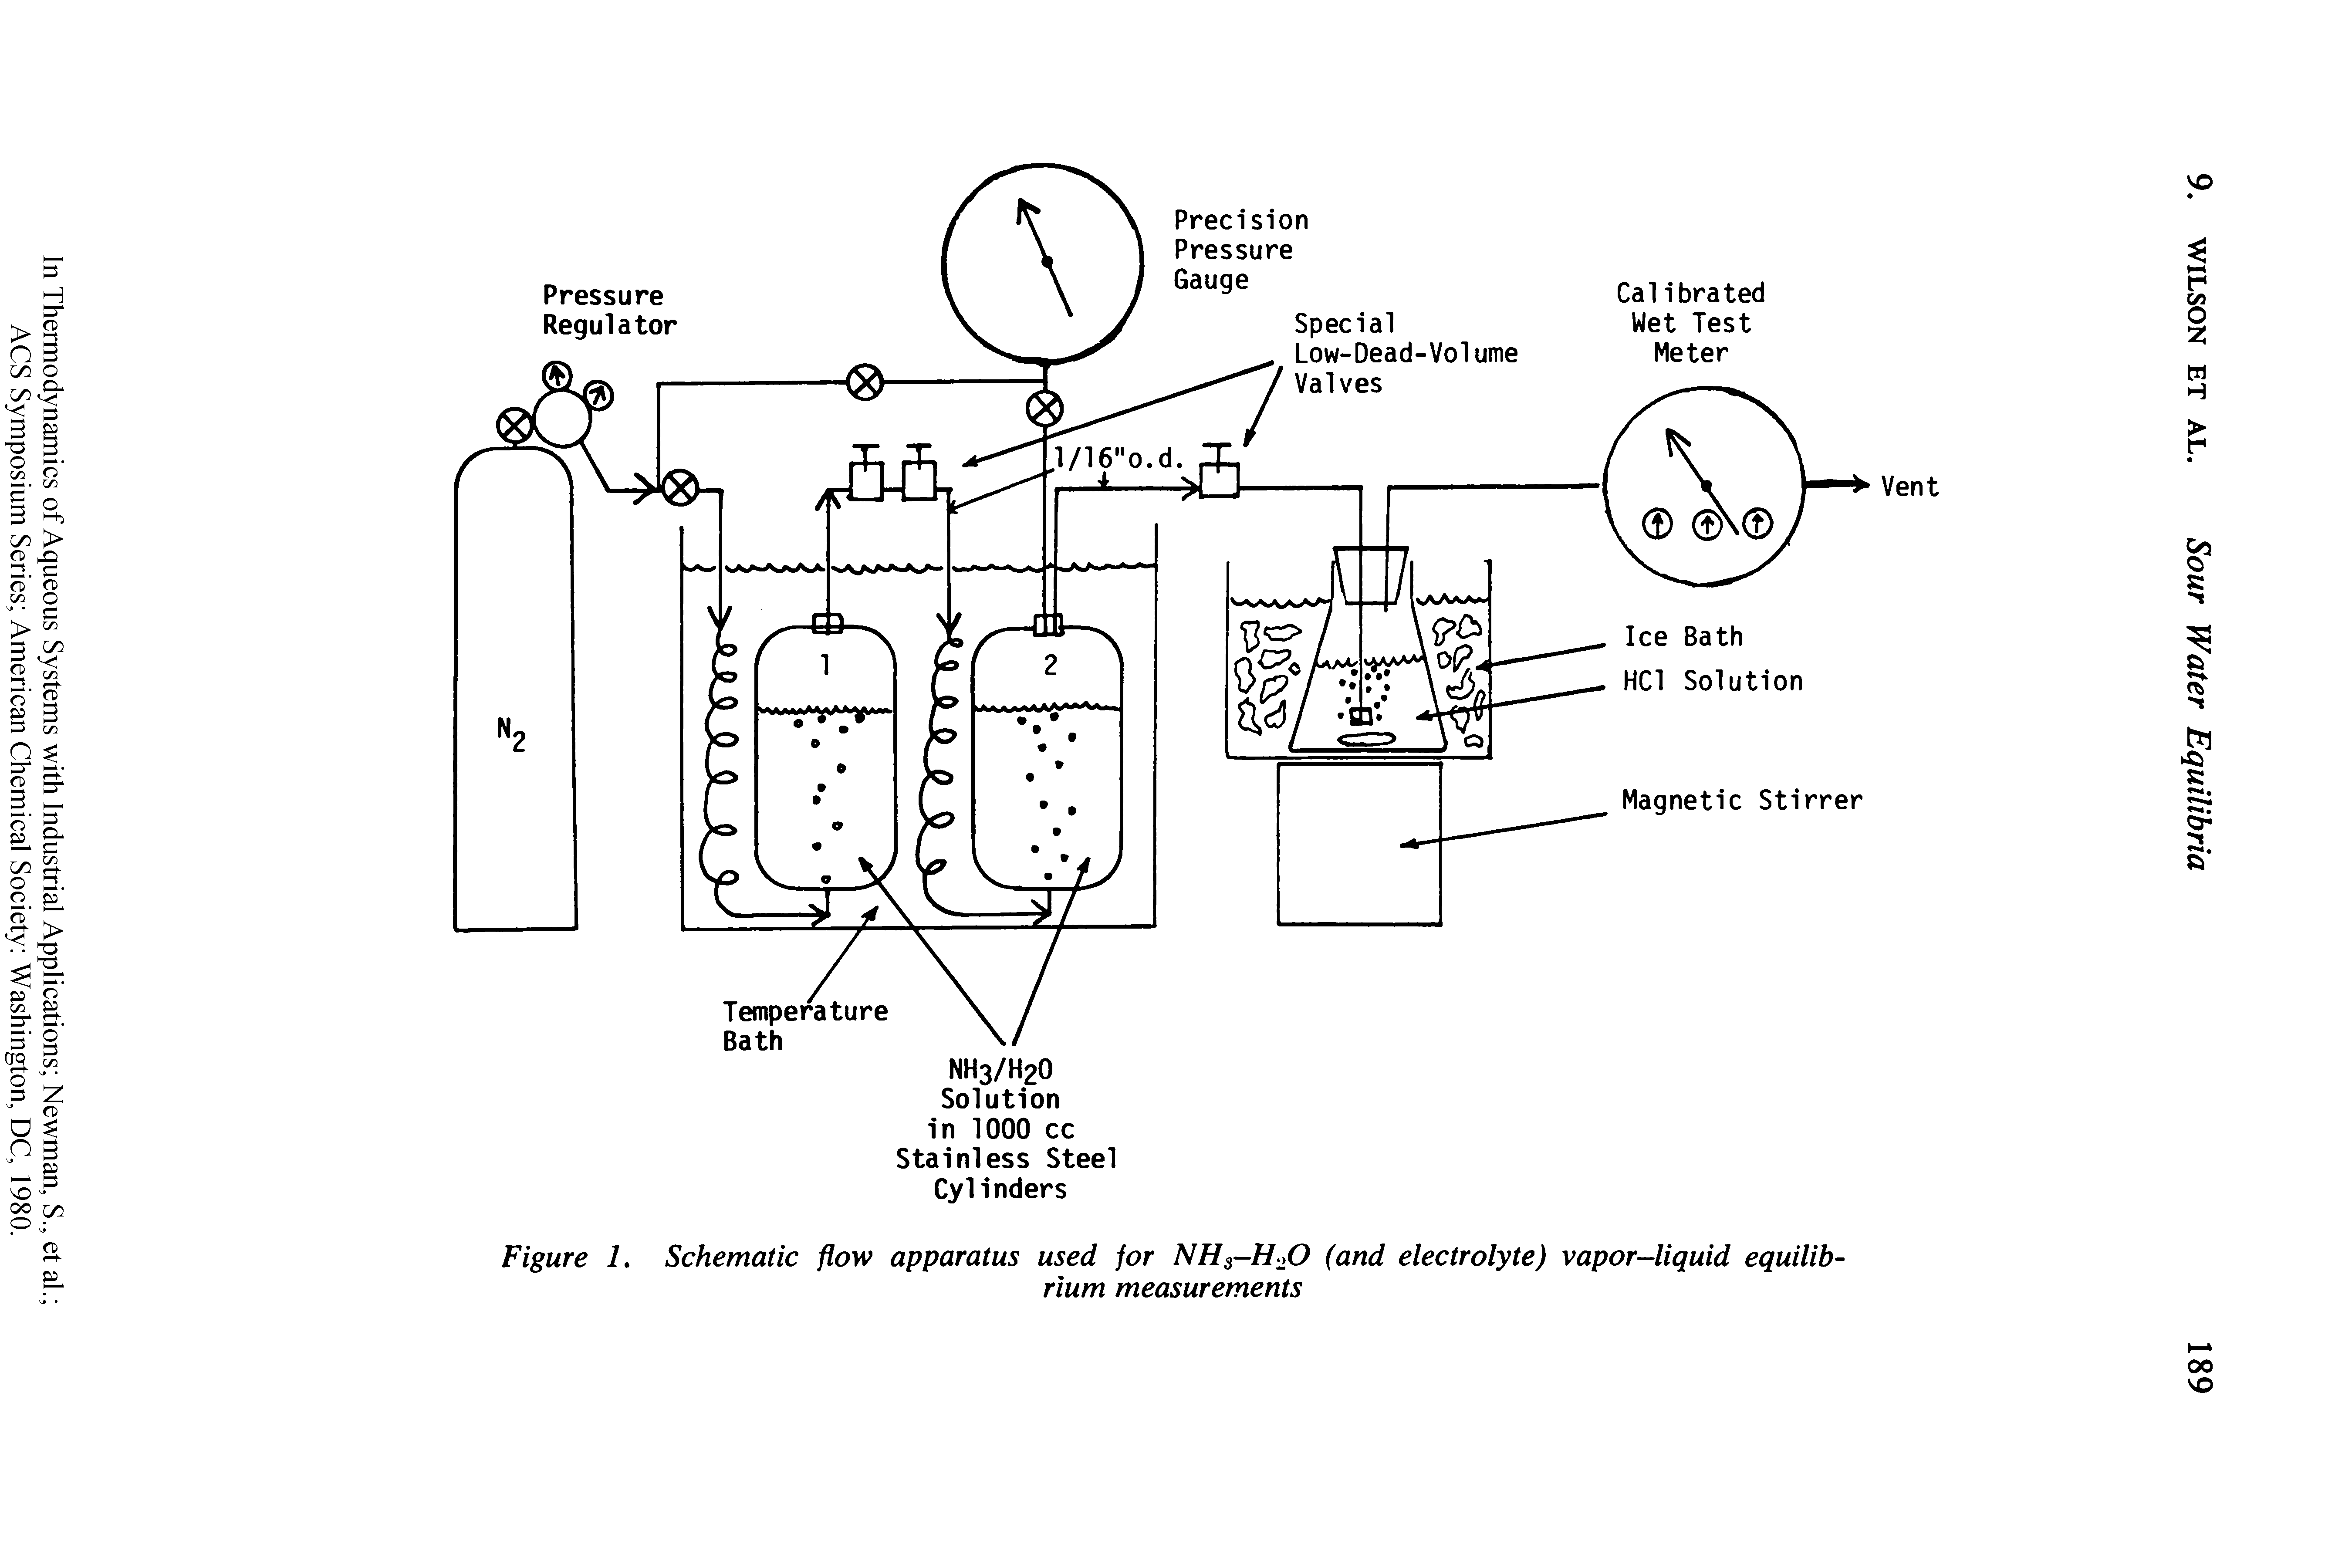 Figure 1. Schematic flow apparatus used for NH3-H20 (and electrolyte) vapor-liquid equilibrium measurements...